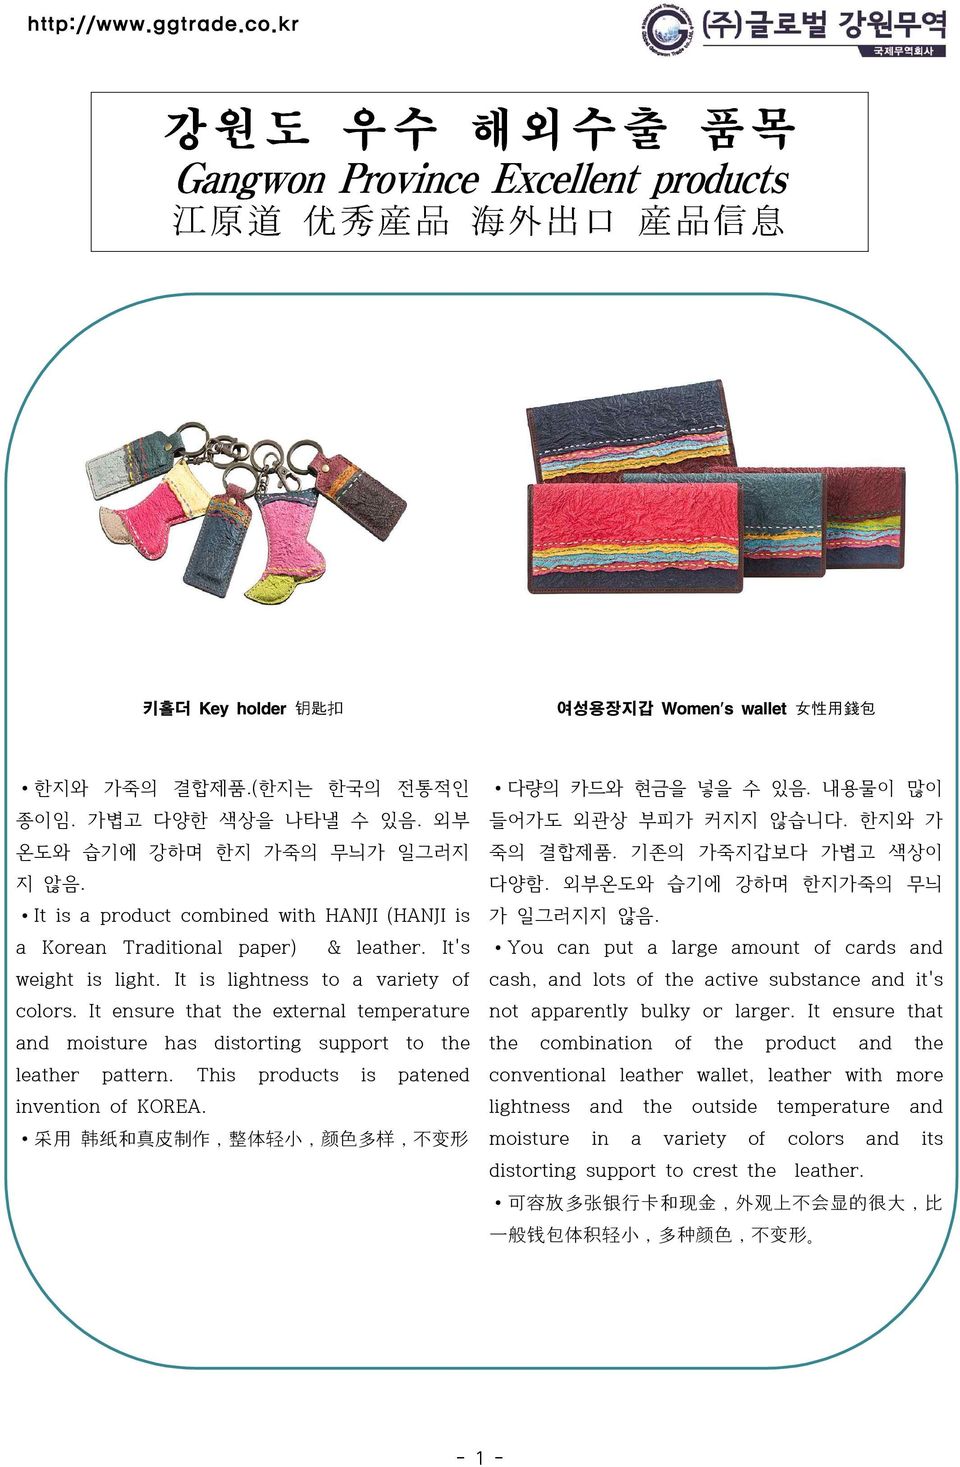 It ensure that the external temperature and moisture has distorting support to the leather pattern. This products is patened invention of KOREA.